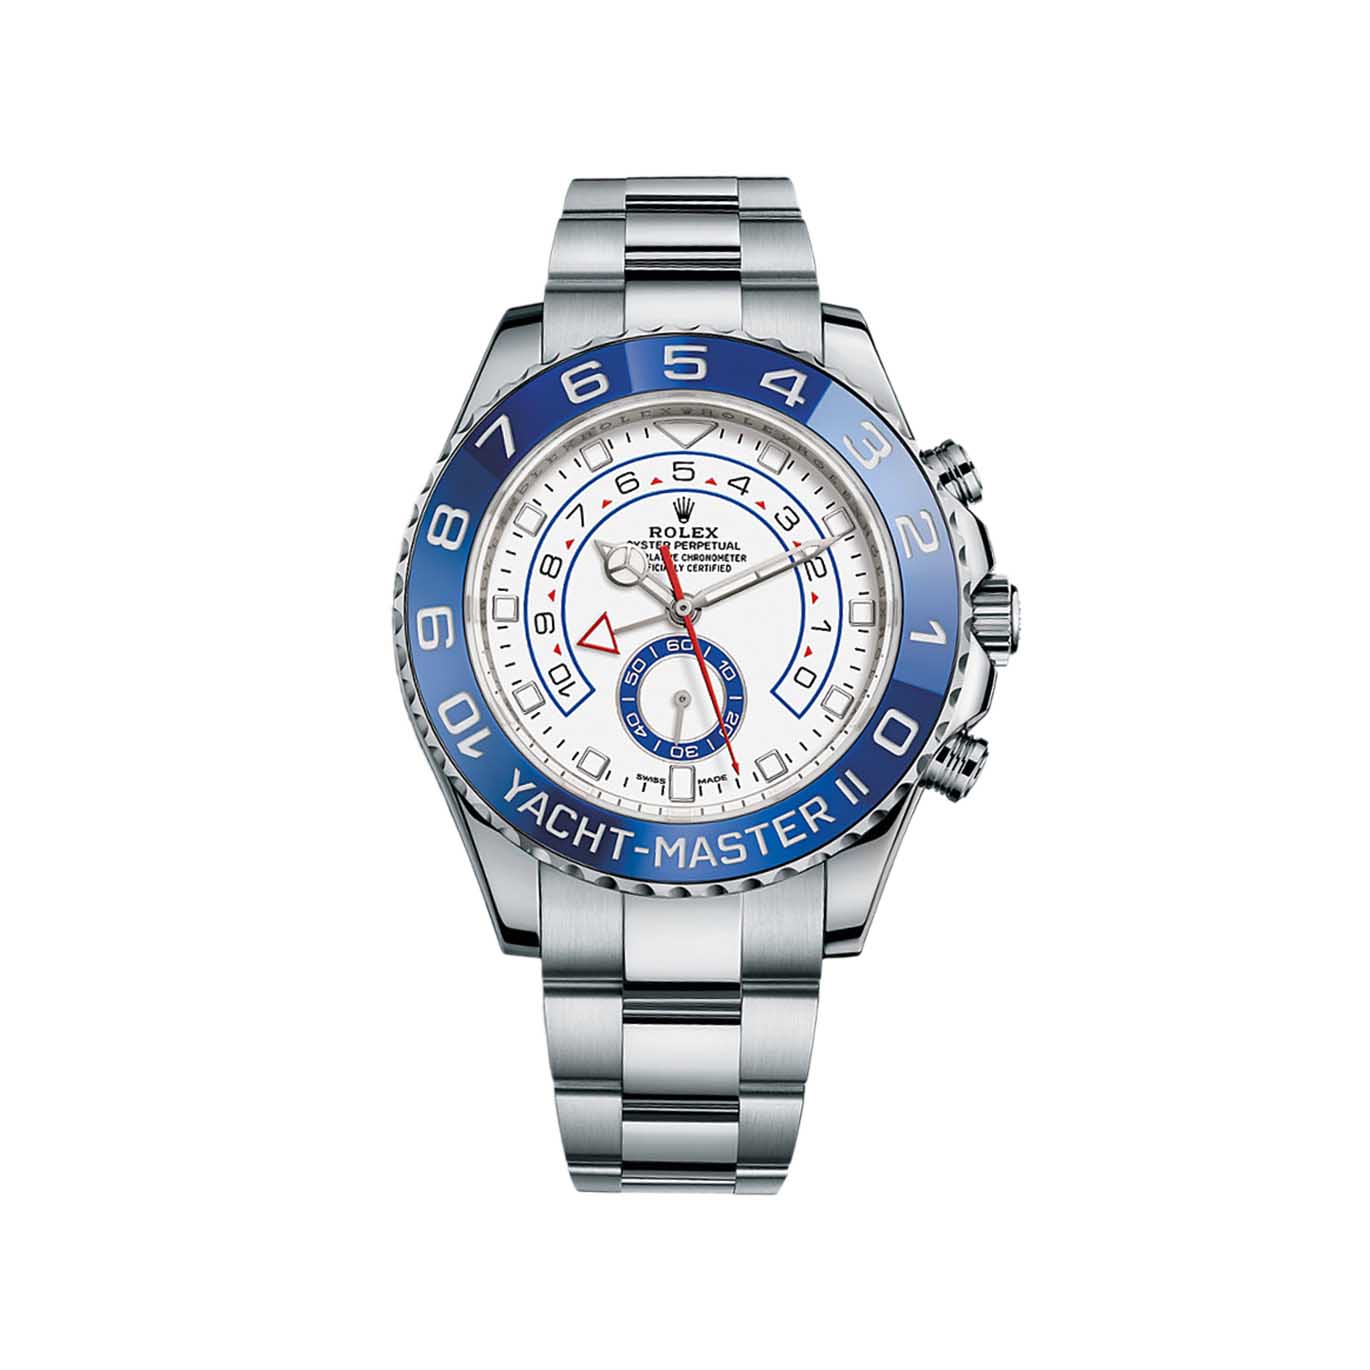 Yacht-Master II 116680 Stainless Steel Watch (White)